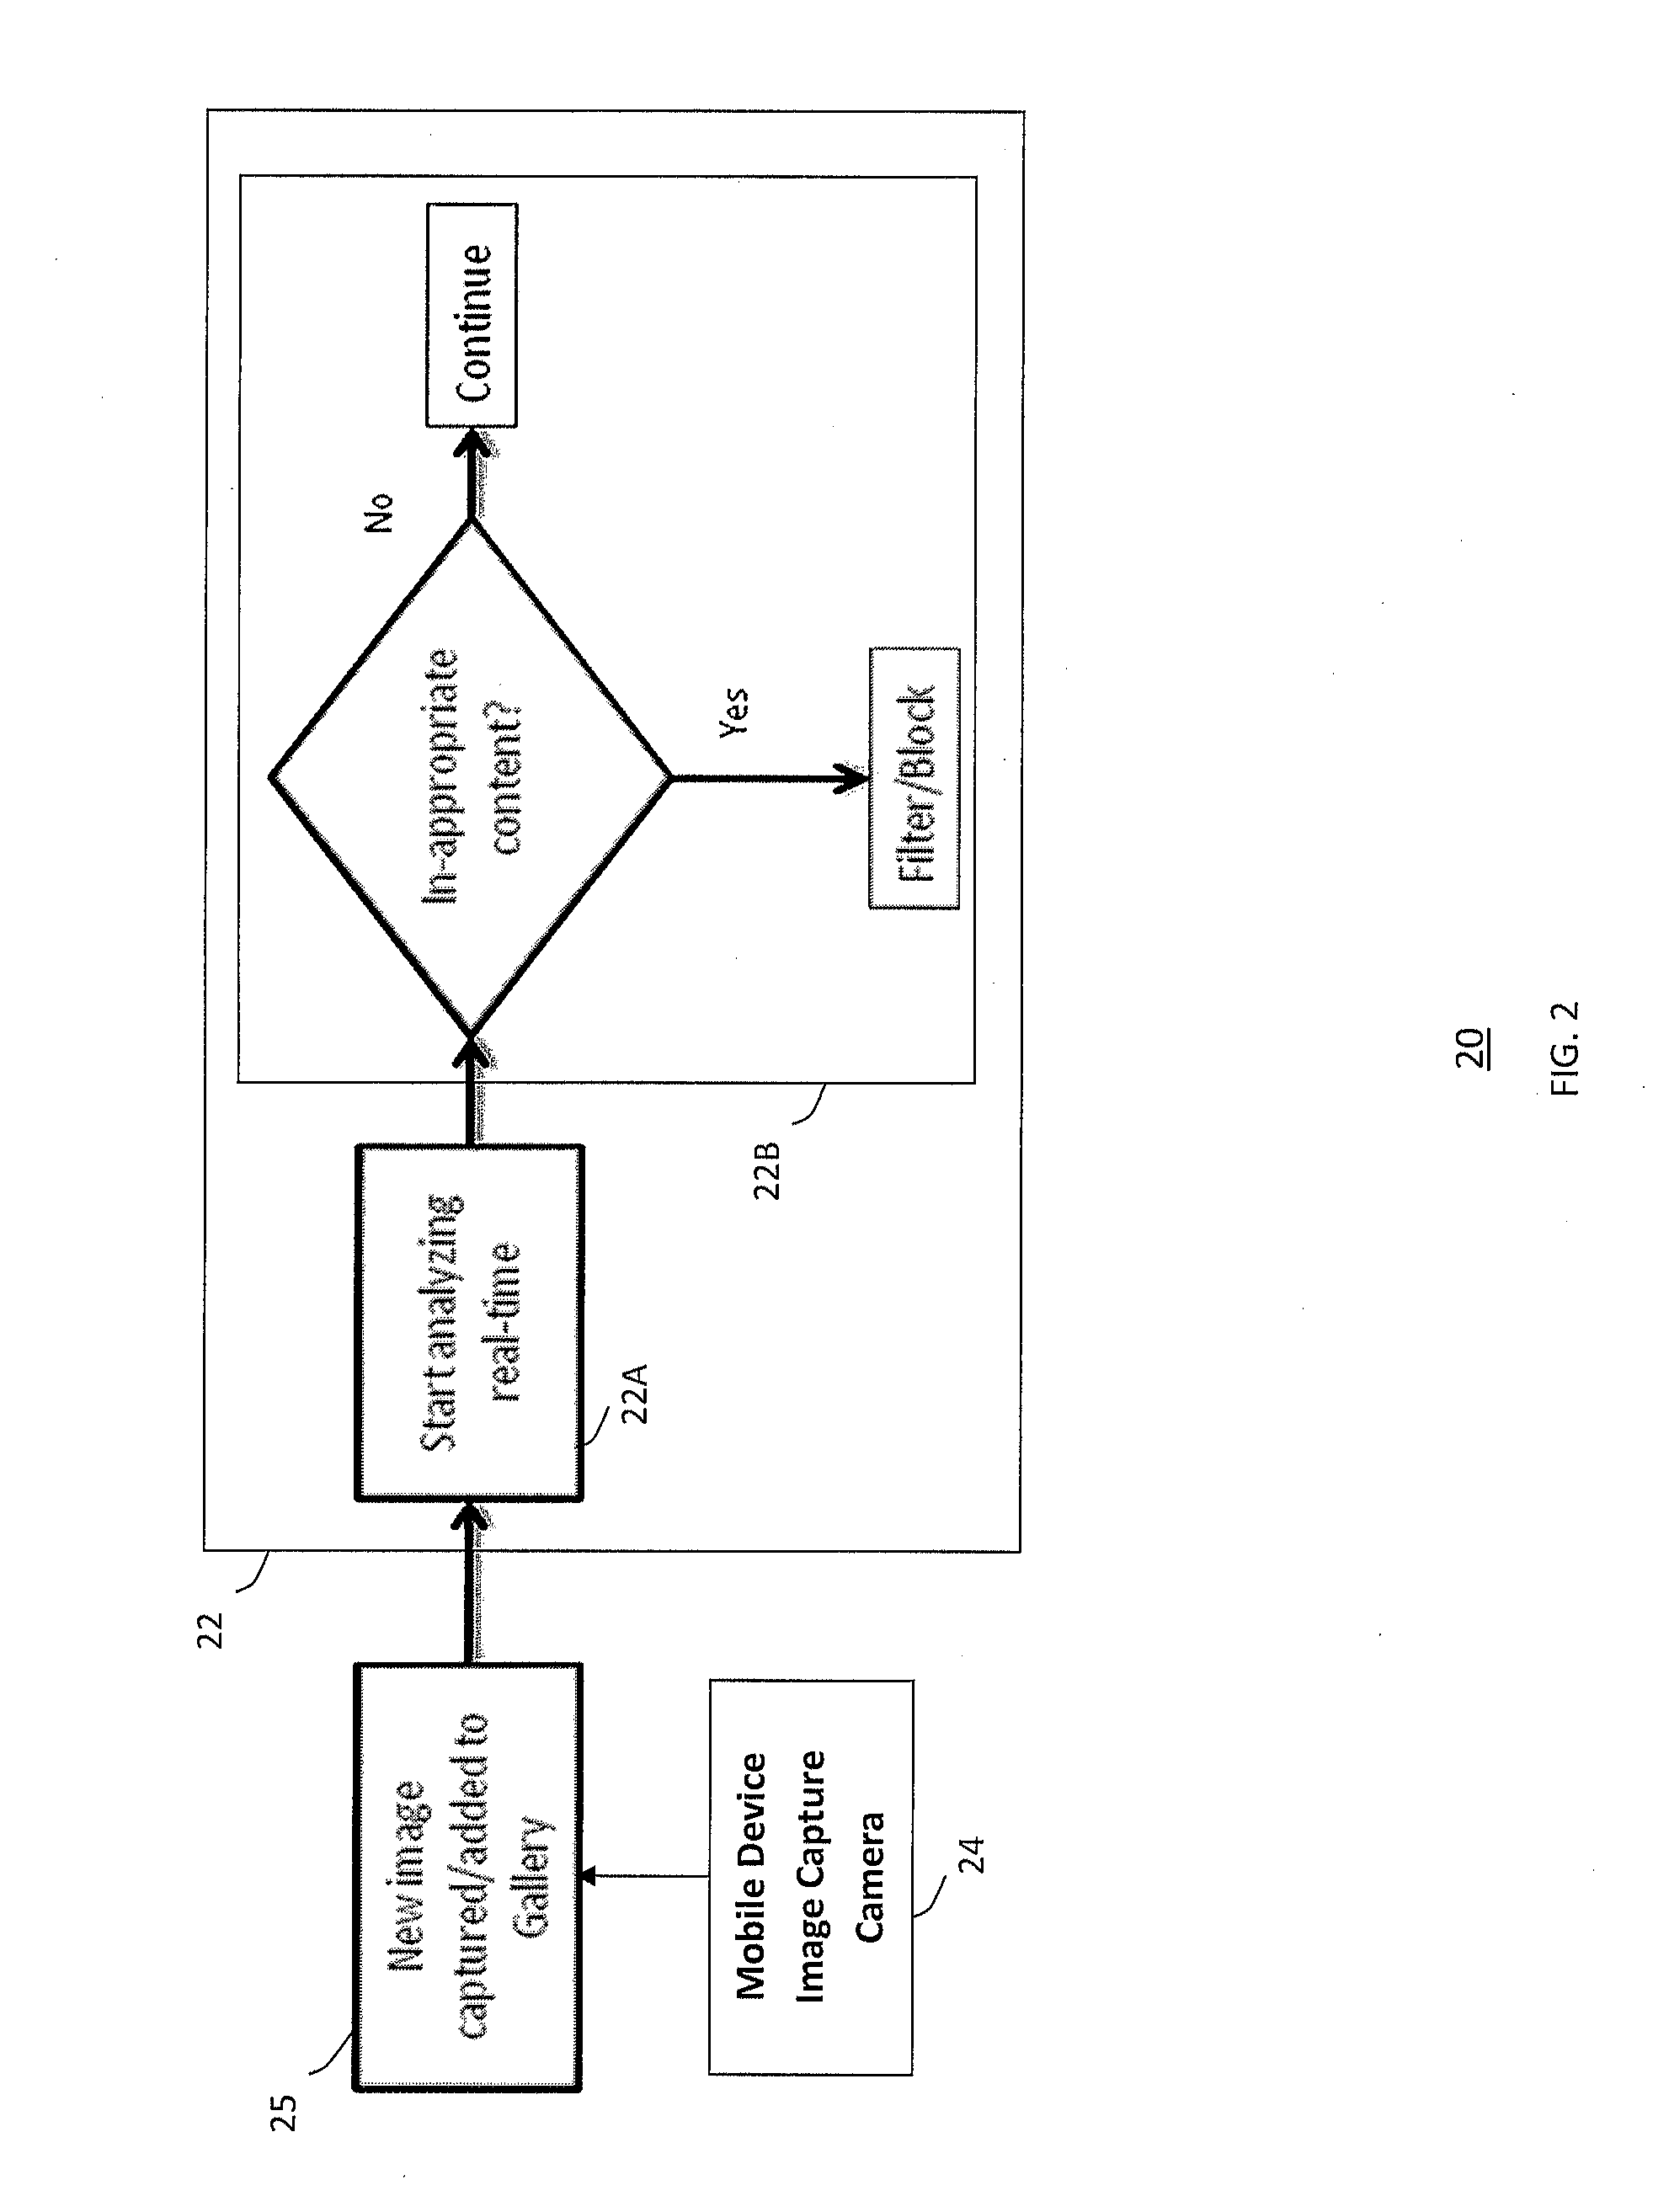 Method and system for information content validation in electronic devices